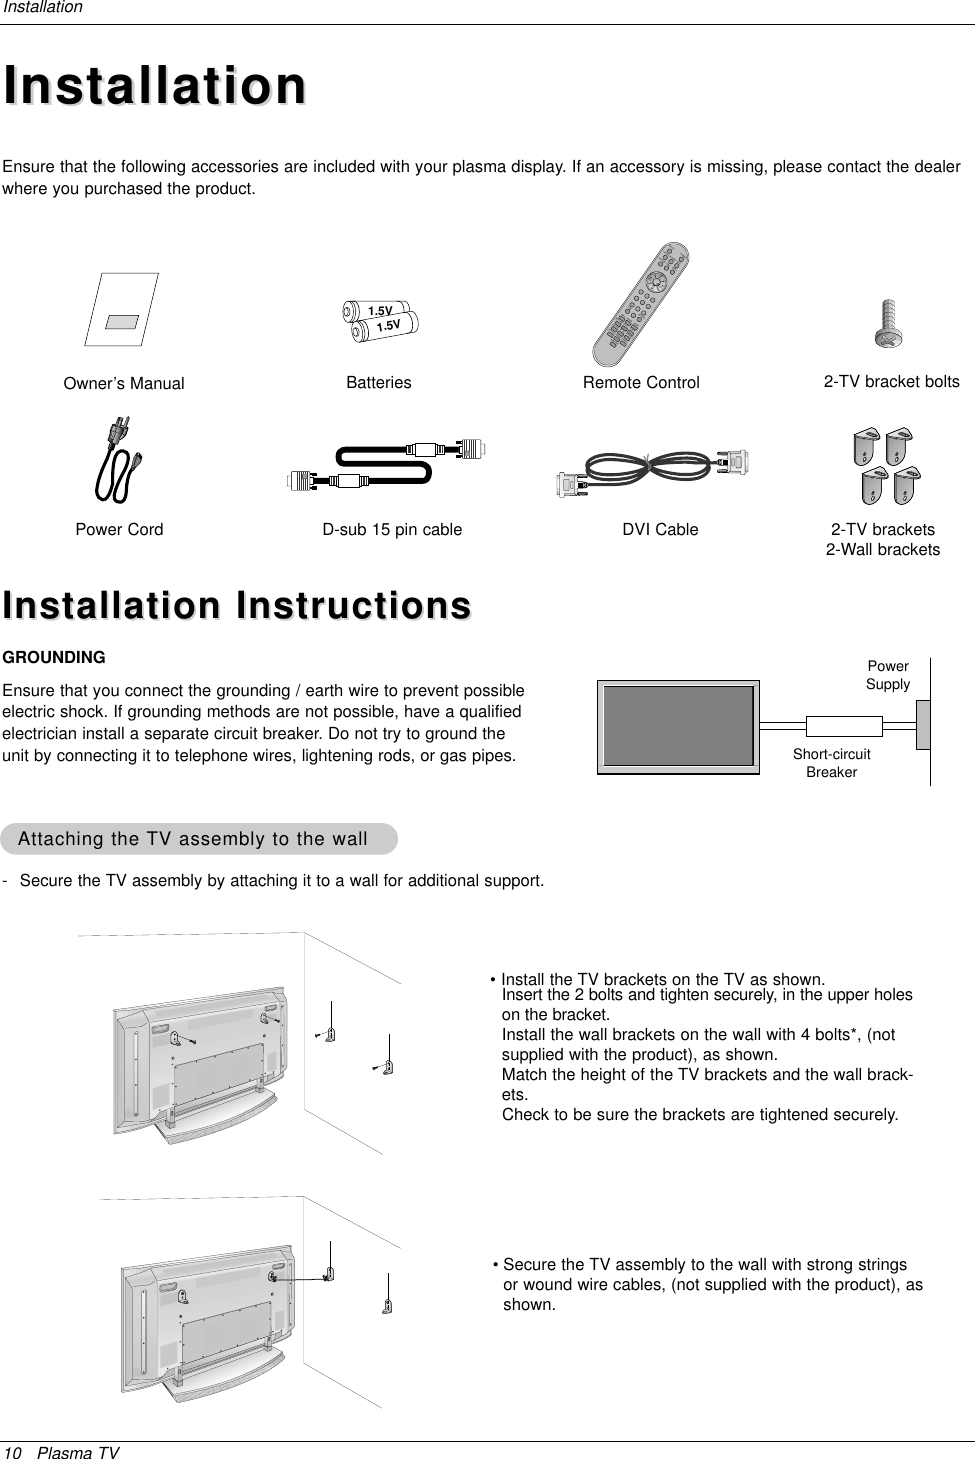 10 Plasma TVInstallation- Secure the TV assembly by attaching it to a wall for additional support.Attaching the Attaching the TV assembly to the wallTV assembly to the wallInstallationInstallationInstallation InstructionsInstallation InstructionsGROUNDINGEnsure that you connect the grounding / earth wire to prevent possibleelectric shock. If grounding methods are not possible, have a qualifiedelectrician install a separate circuit breaker. Do not try to ground theunit by connecting it to telephone wires, lightening rods, or gas pipes.PowerSupplyShort-circuitBreaker• Install the TV brackets on the TV as shown.Insert the 2 bolts and tighten securely, in the upper holeson the bracket. Install the wall brackets on the wall with 4 bolts*, (notsupplied with the product), as shown.Match the height of the TV brackets and the wall brack-ets. Check to be sure the brackets are tightened securely.• Secure the TV assembly to the wall with strong stringsor wound wire cables, (not supplied with the product), asshown.Owner’s Manual1.5V1.5VBatteriesPower CordPOWERMUTETV/VIDEOMULTIMEDIAMTSCAPTIONCHCHVOLENTER1234567890VOLARCMENUFCRPIP/DWAPC DASPREVIEWSPLIT ZOOMPIP CH +SLEEPPIP CH -PIP INPUTWIN.SIZESWAPMEMORY/ERASEA.PROGPOSITIONRemote ControlEnsure that the following accessories are included with your plasma display. If an accessory is missing, please contact the dealerwhere you purchased the product.D-sub 15 pin cable DVI Cable 2-TV brackets2-Wall brackets2-TV bracket bolts